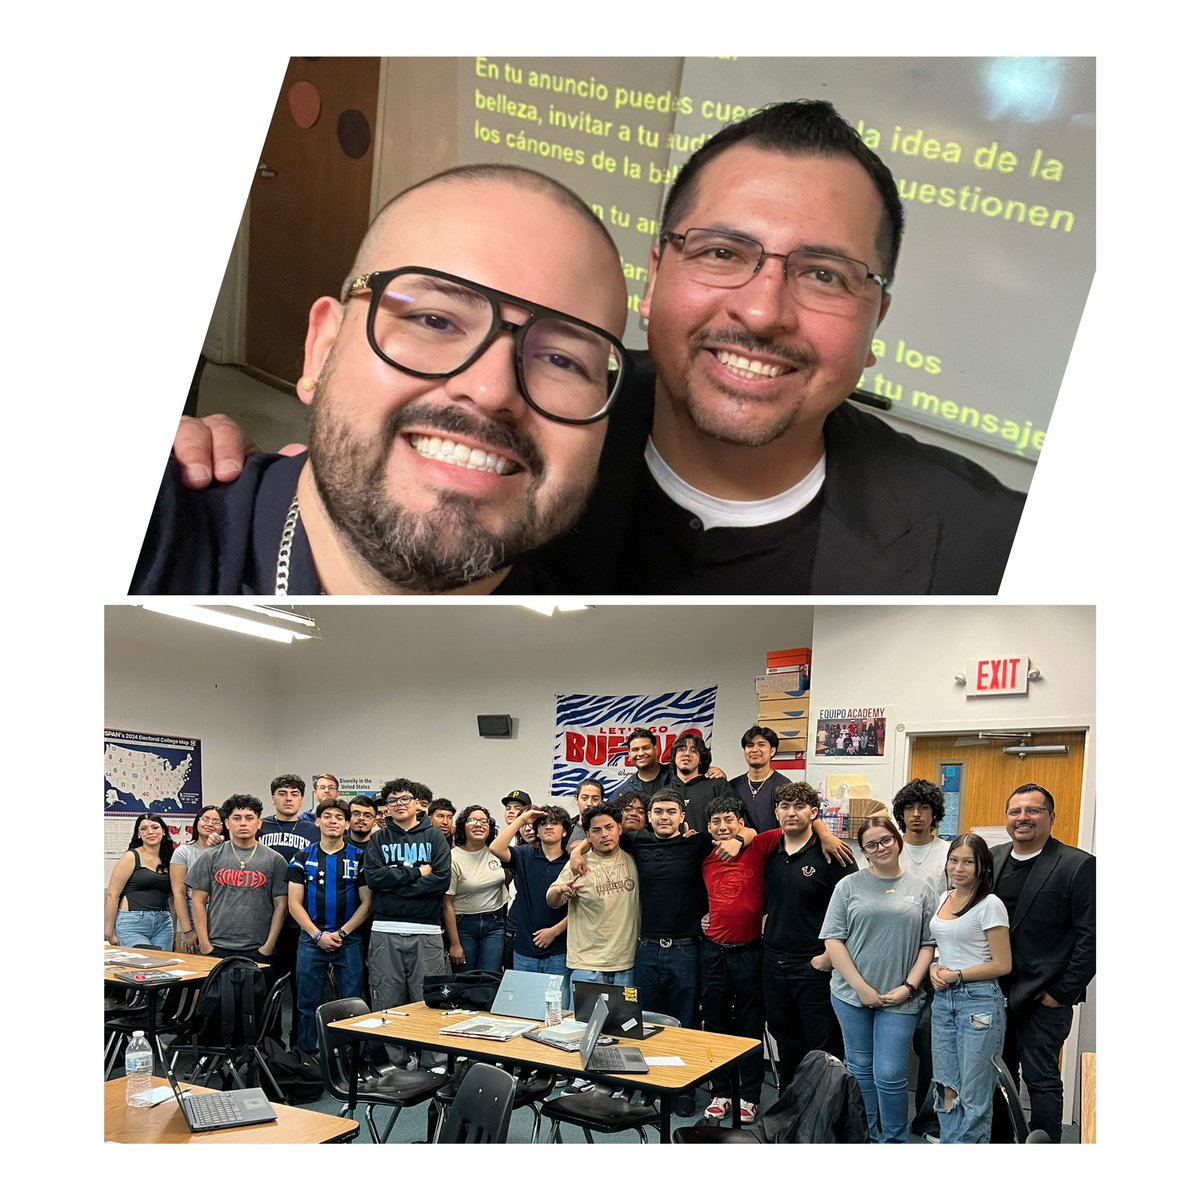 Best way to commence a Thursday morning is by hanging out with dynamic US Govt. AP from @equipoacademy students who will soon be graduating. We discussed #Family #HardWork #Graduating #Law #Legislature #SD2 #OurFutureIsBright ran into profesor Juanito (childhood friend)